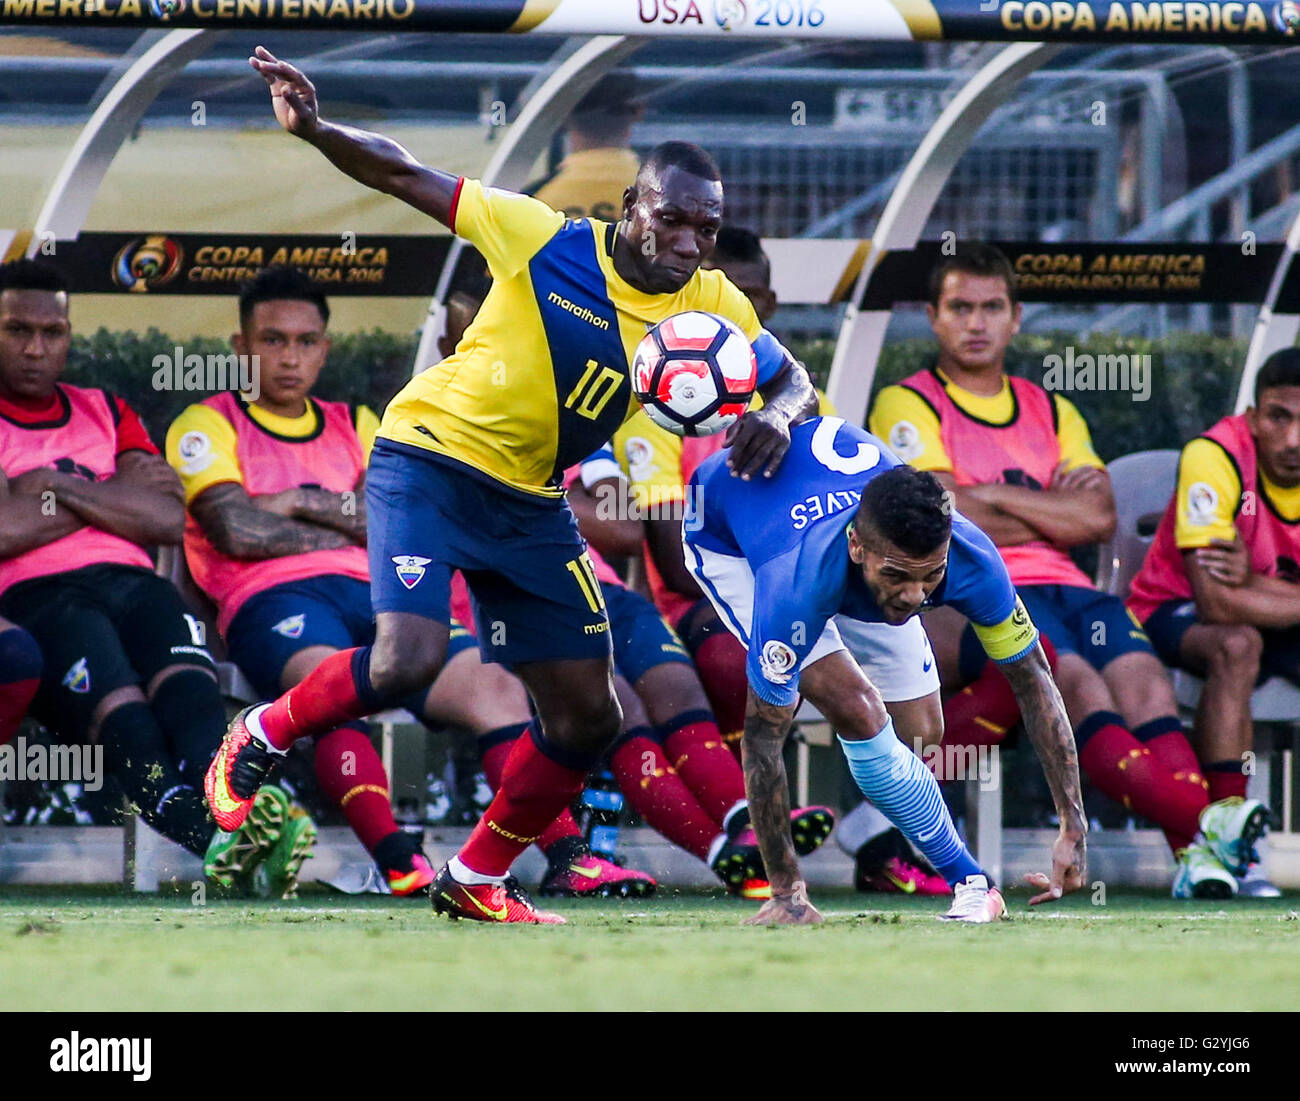 Pasadena, USA. 4th June, 2016. Walter Ayovi (L) of Ecuador vies with Dani Alves of Brazil during their 2016 Copa America Centenario Group B match in Pasadena, the United States, June 4, 2016. The match ended with a 0-0 draw. © Zhao Hanrong/Xinhua/Alamy Live News Stock Photo